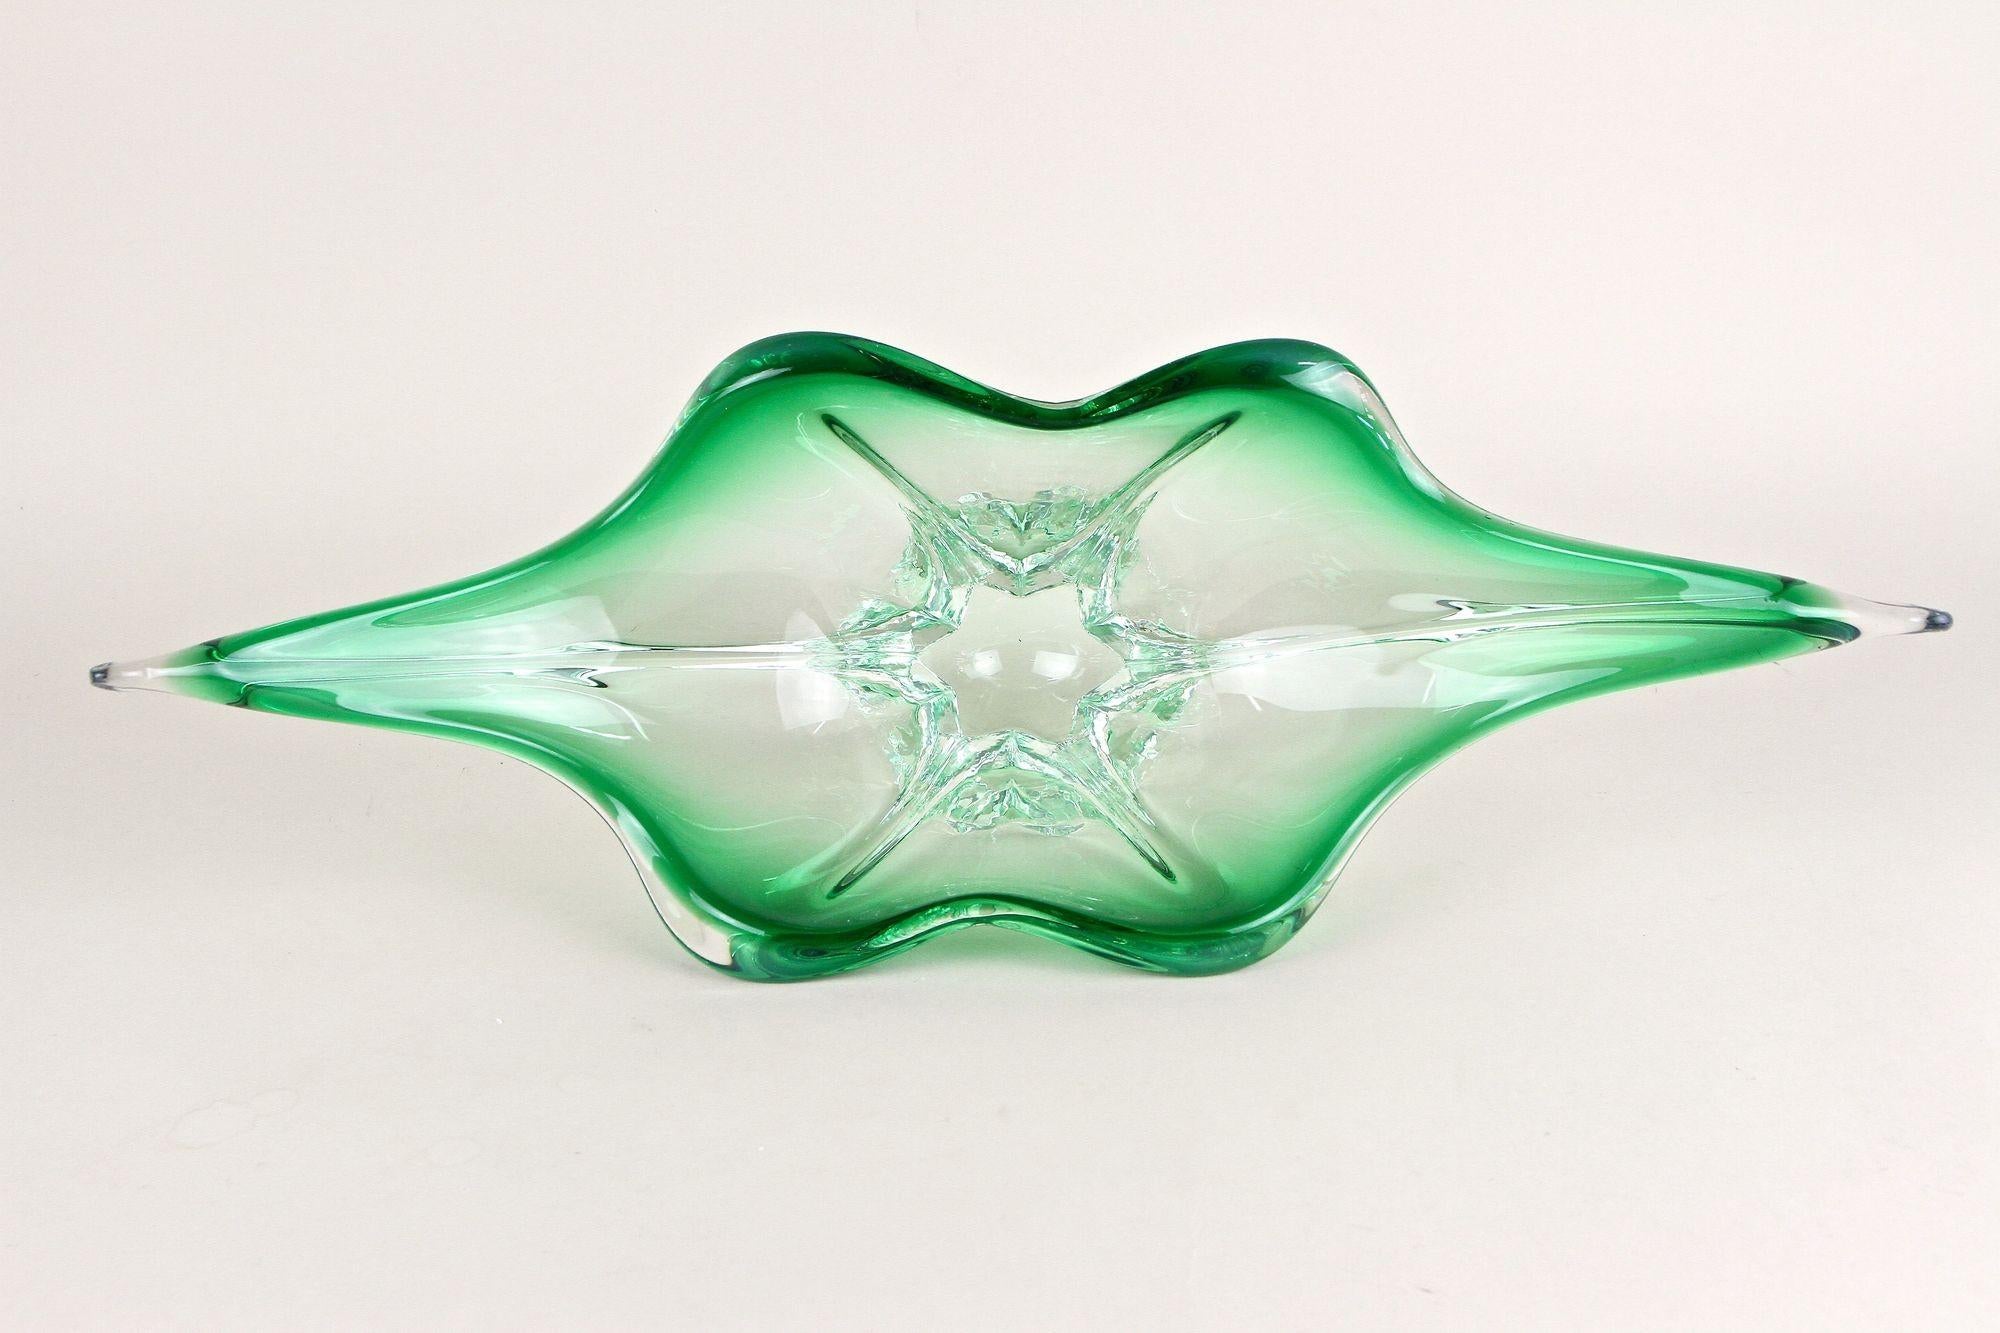 Mid Century Modern Murano Glass Bowl, Green/ Clear Tones - Italy ca. 1960 For Sale 4